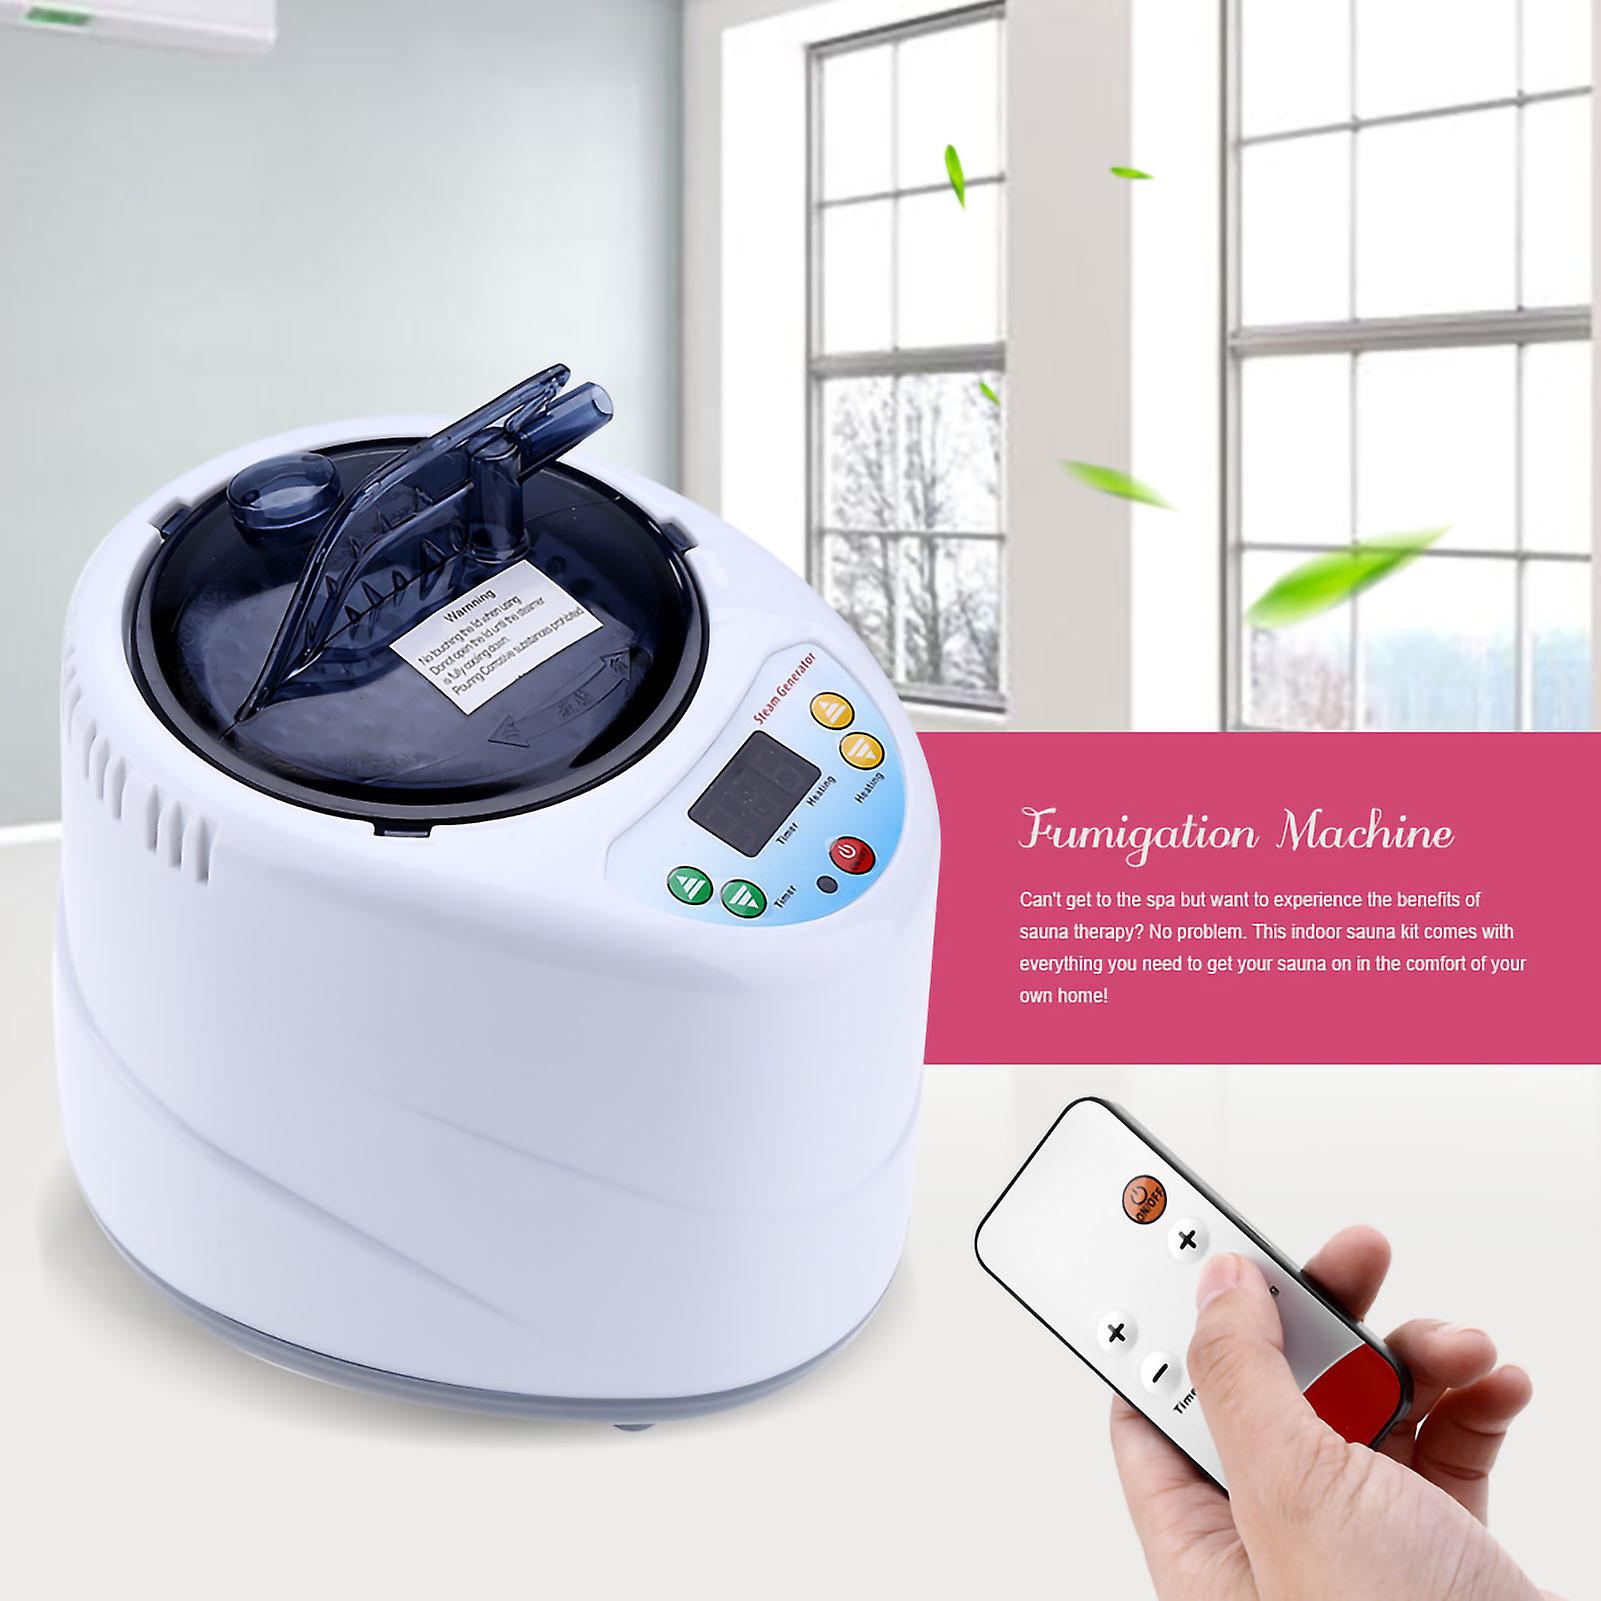 2l Fumigation Machine With Remote Control And Safety Protection For Sauna Spa Tent Body Therapy[us Plug 110v]